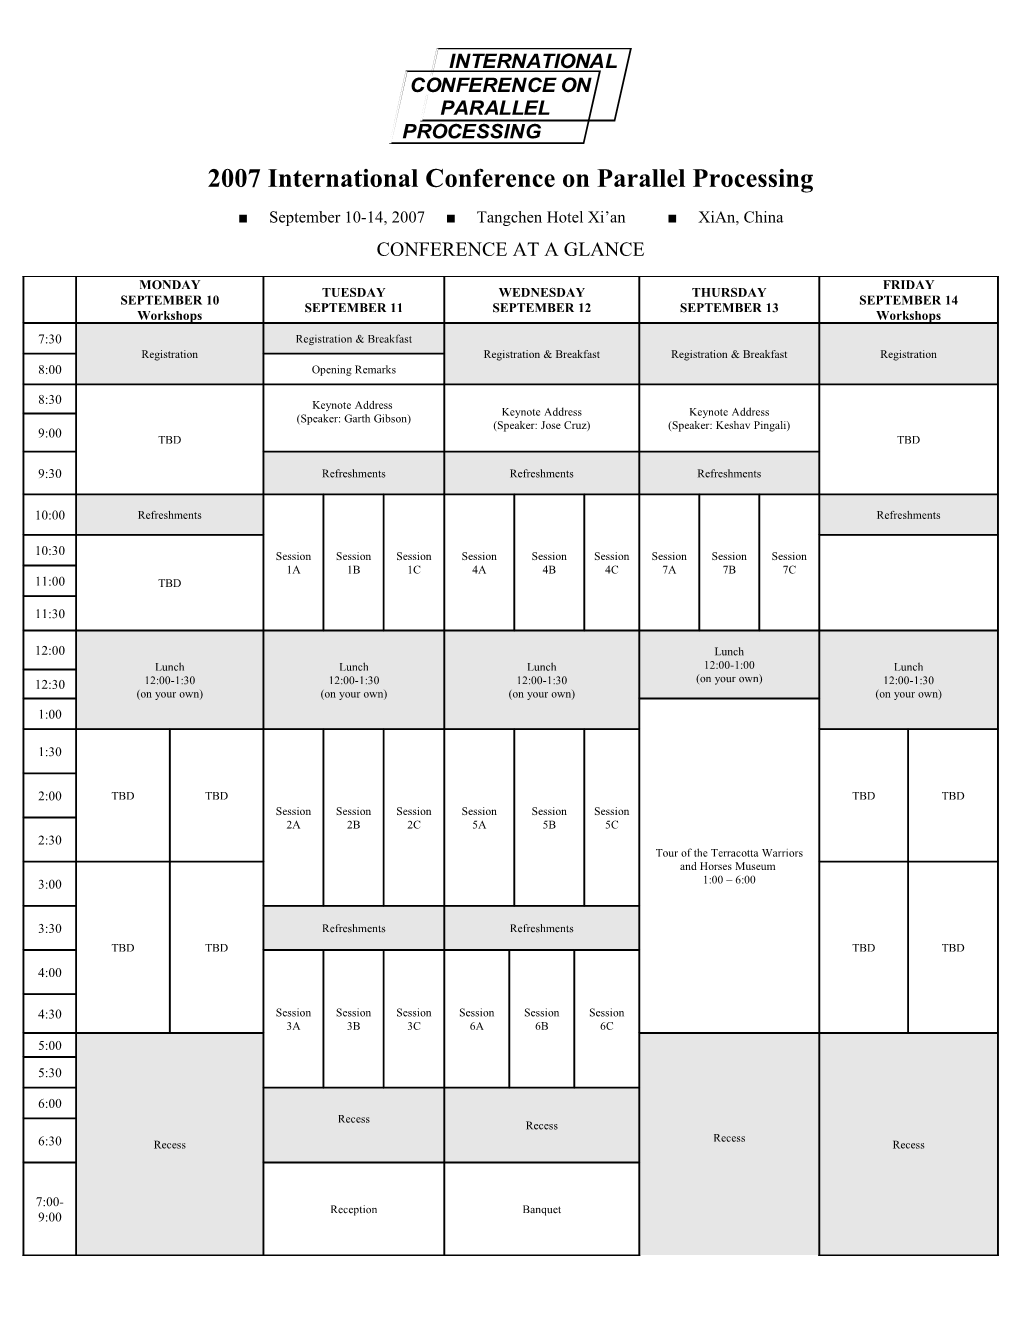 2007 International Conference on Parallel Processing s1